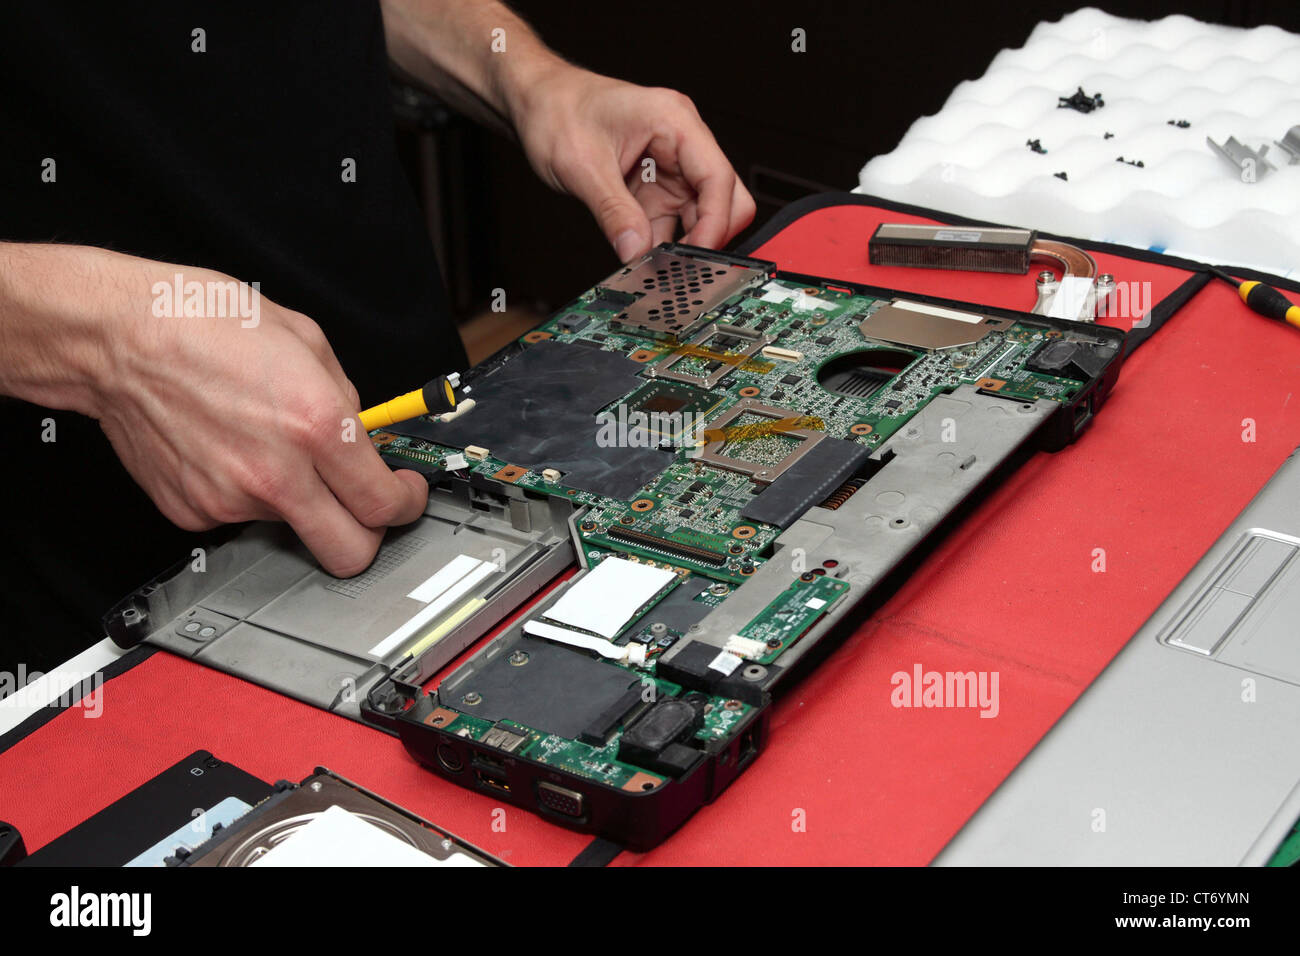 Closeup of computer being repaired by technician. Stock Photo